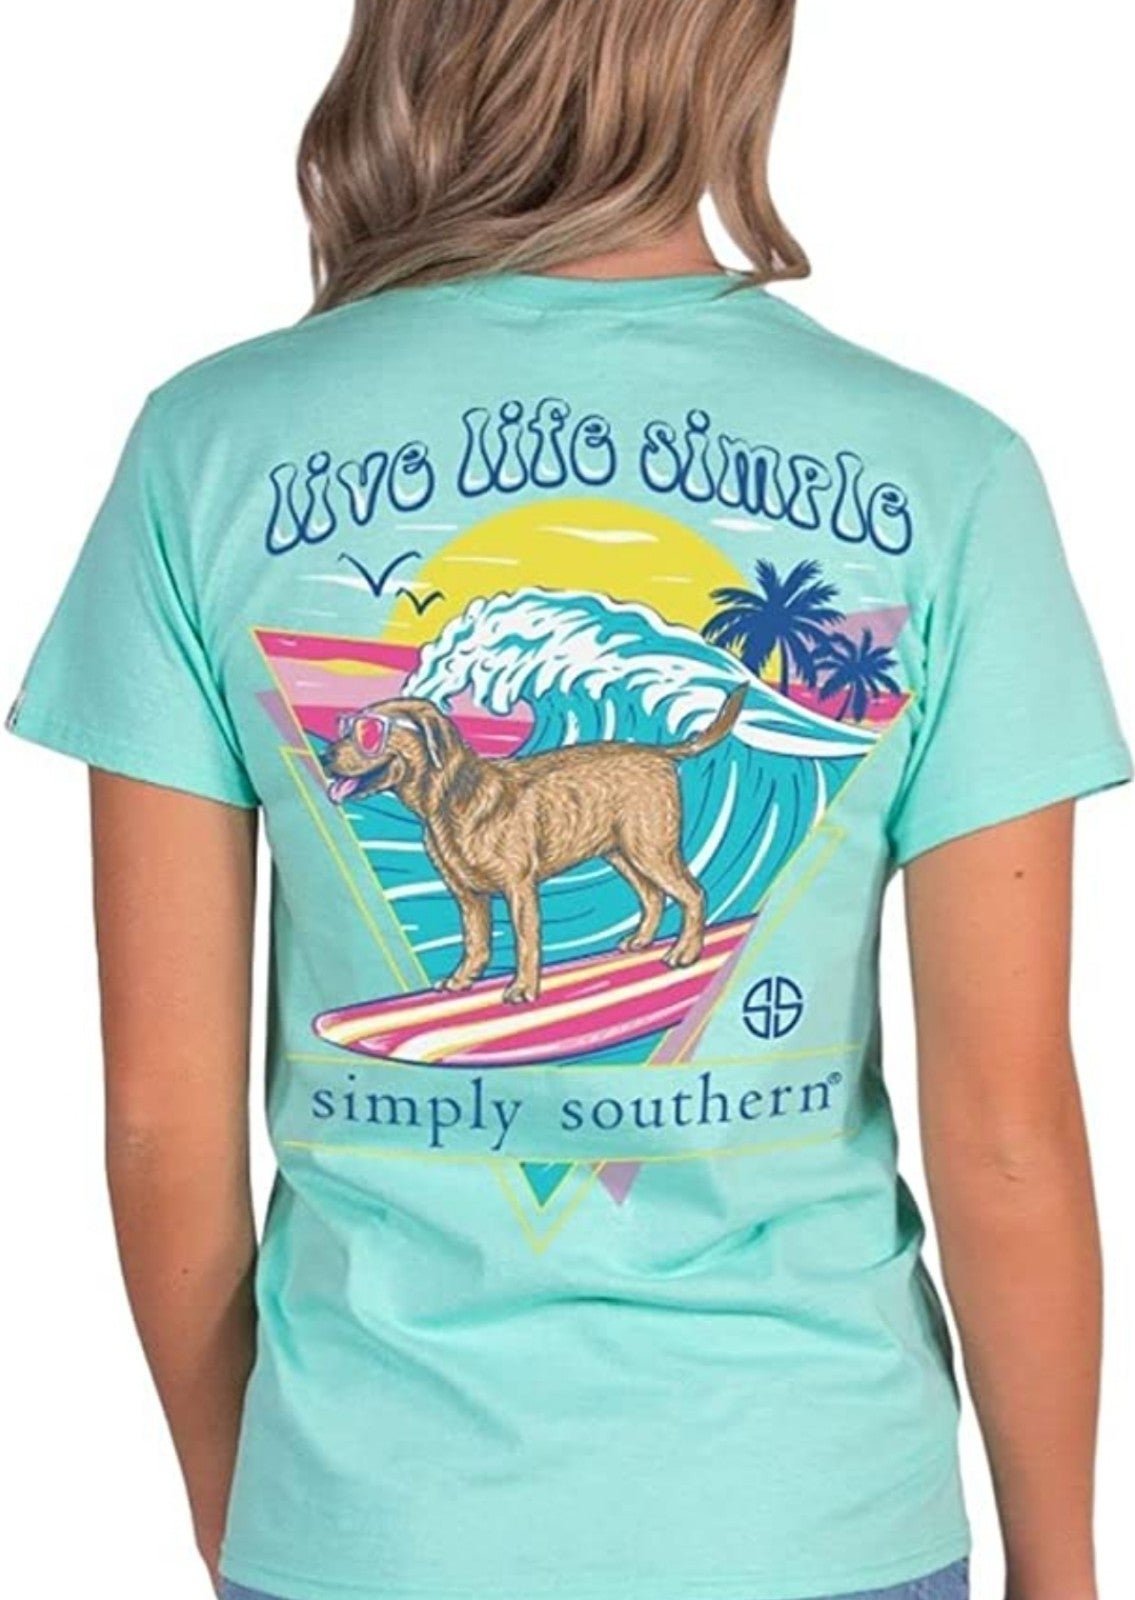 Special offer  Simply Southern T-shirt XX-Large oC0VF8T